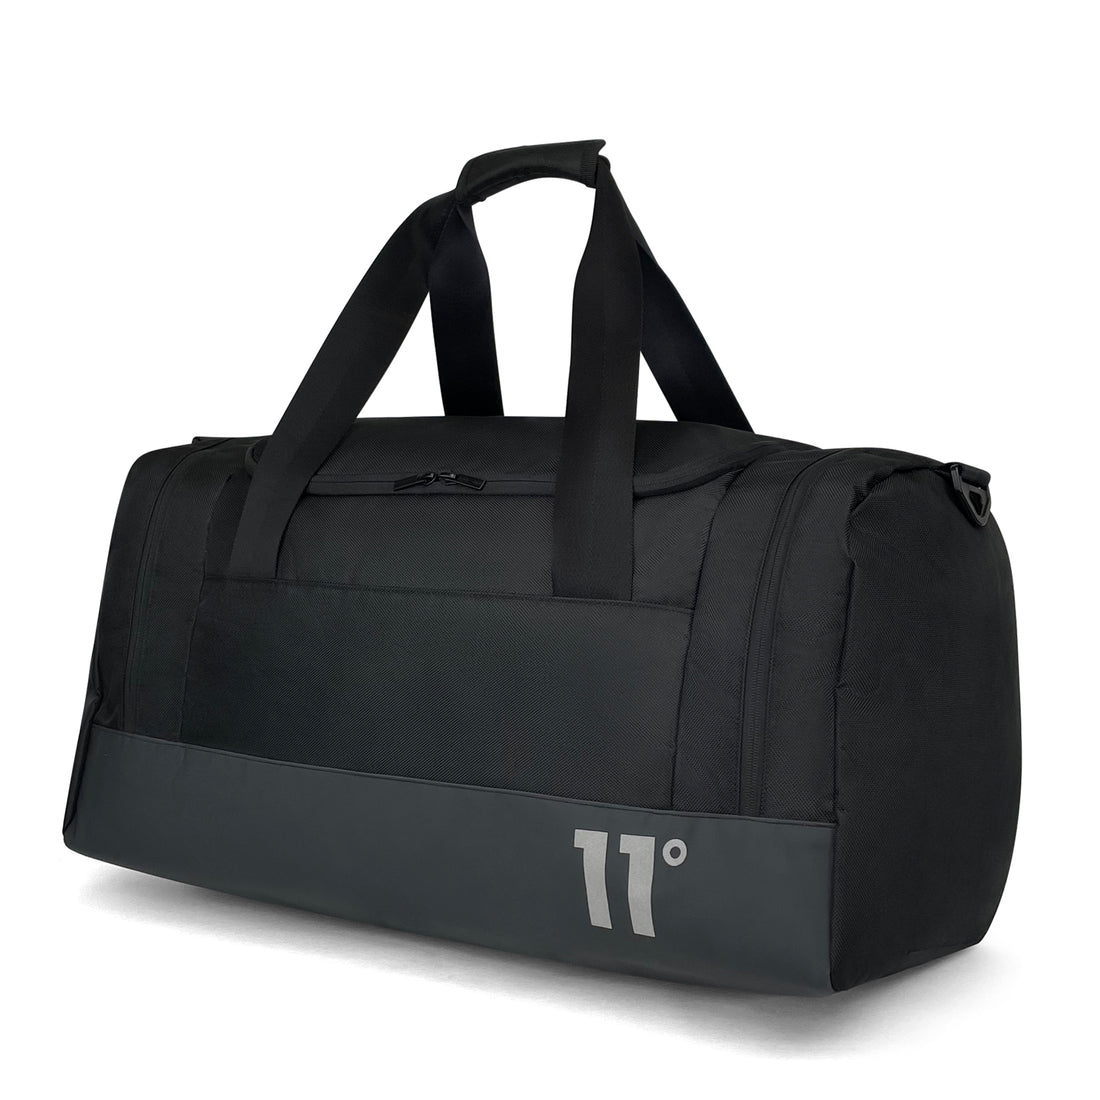 Activate Holdall Duffle Bag-Duffle Bags-11 Degrees-Black-SchoolBagsAndStuff